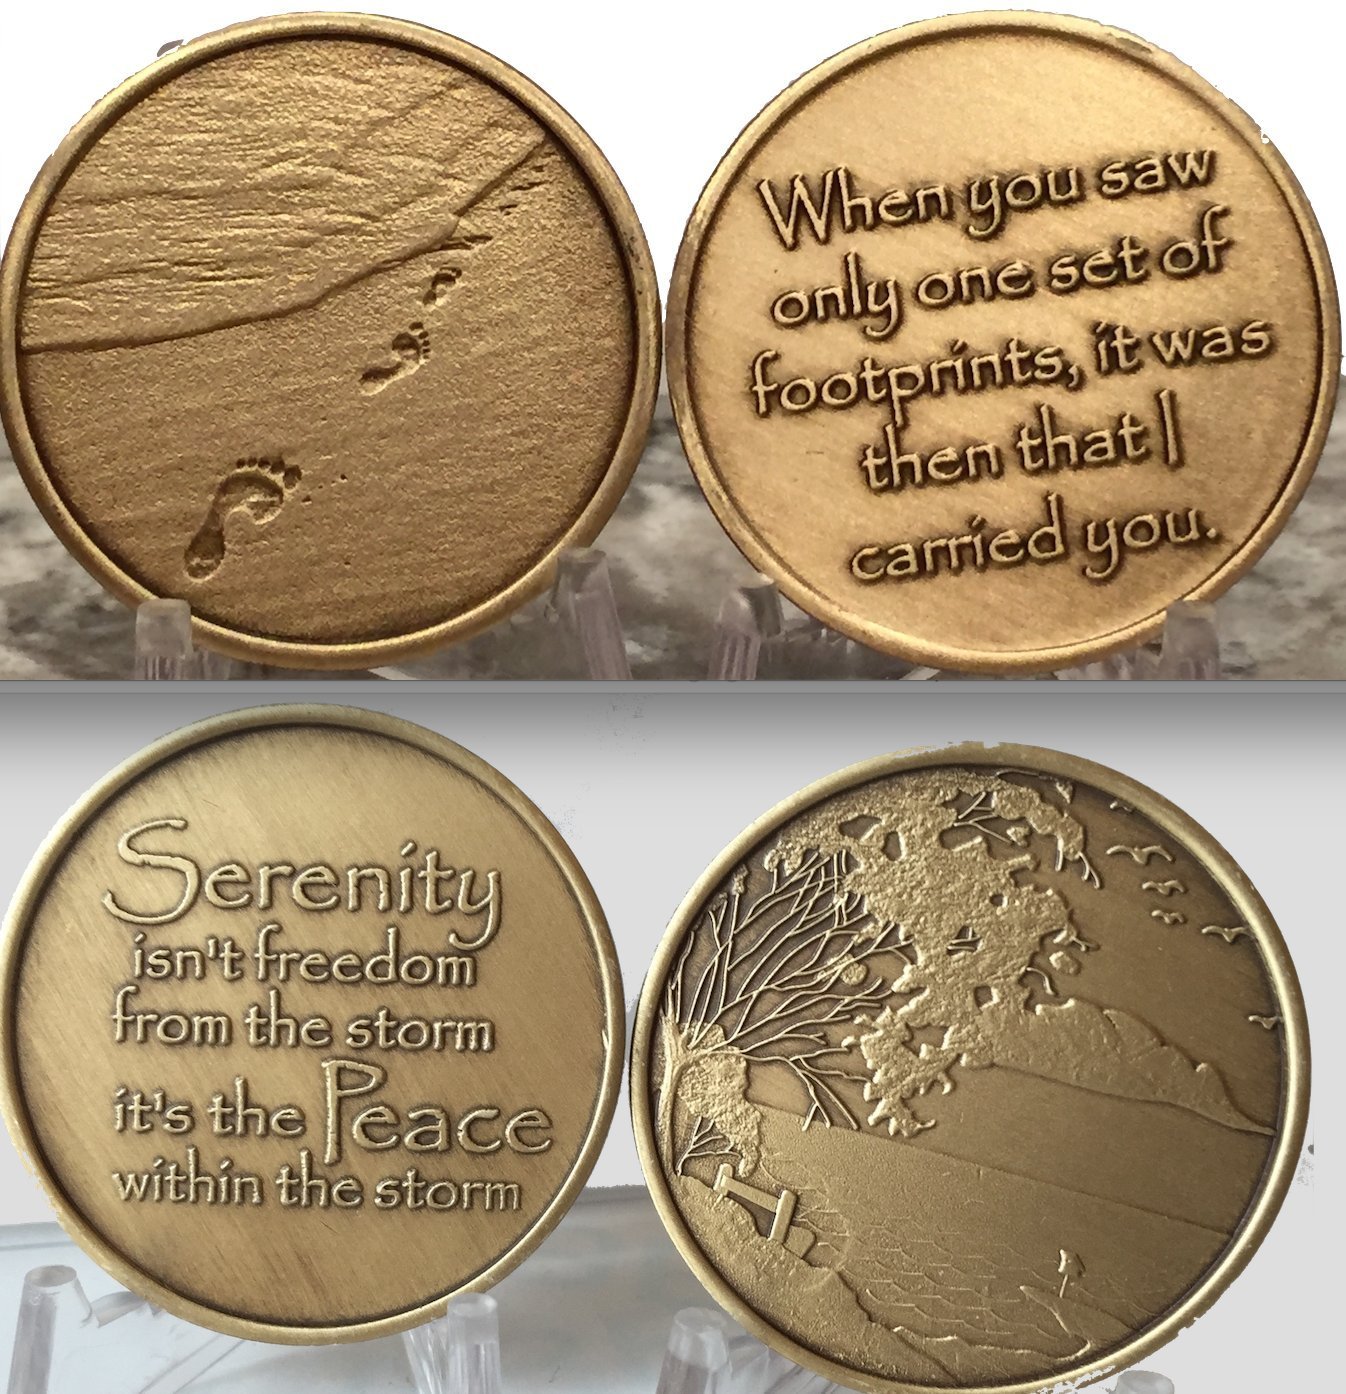 Recoverychip - Footprints in the sand - serenity peace within the storm bronze medallion chi...